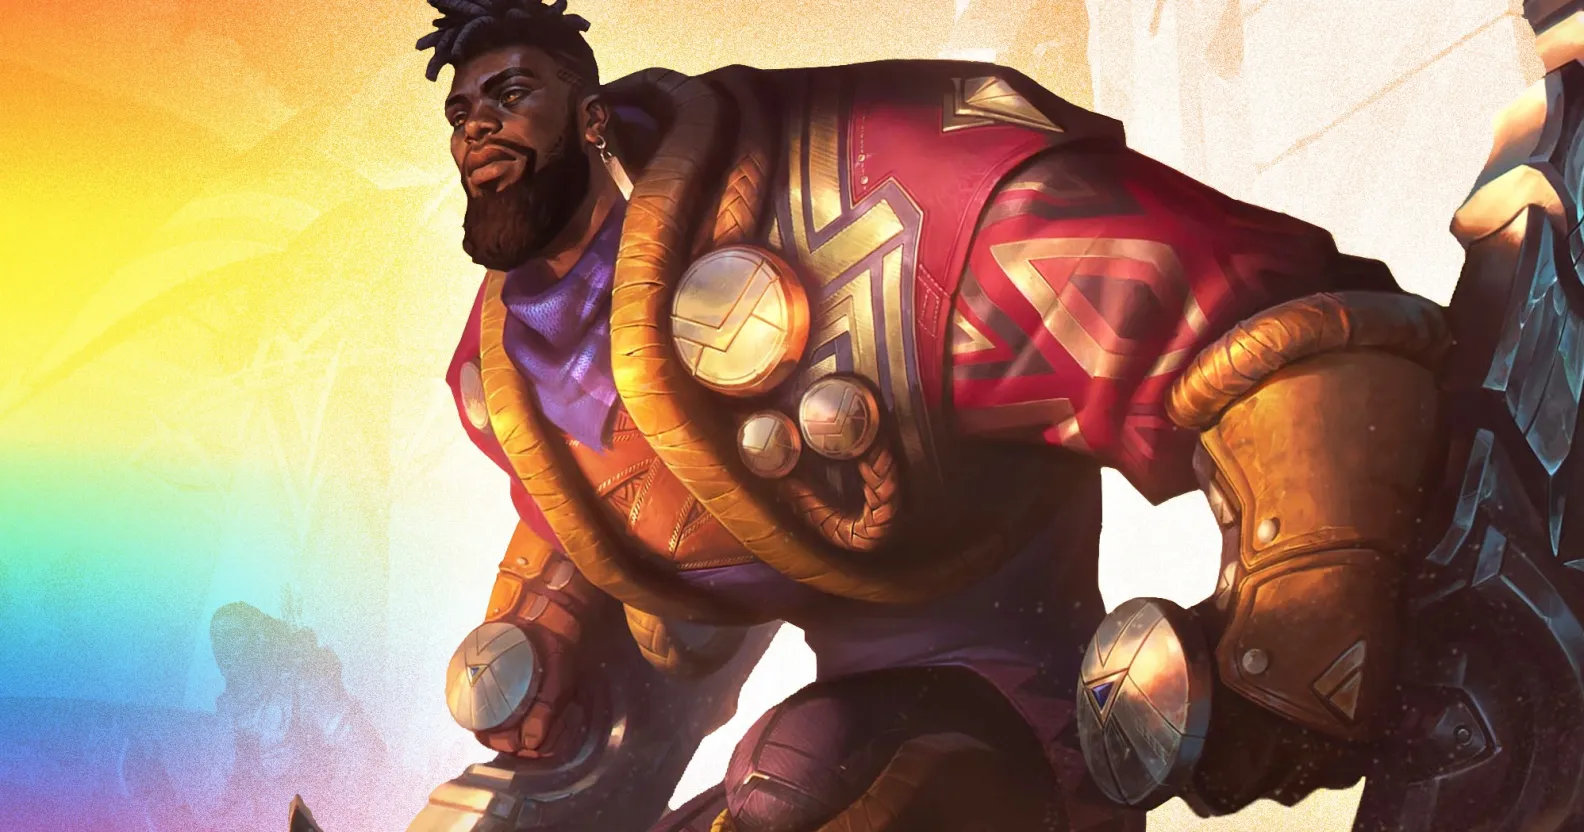 A promo image of K'Sante, the first Black LGBTQ+ champion warrior to appear in video game League of Legends